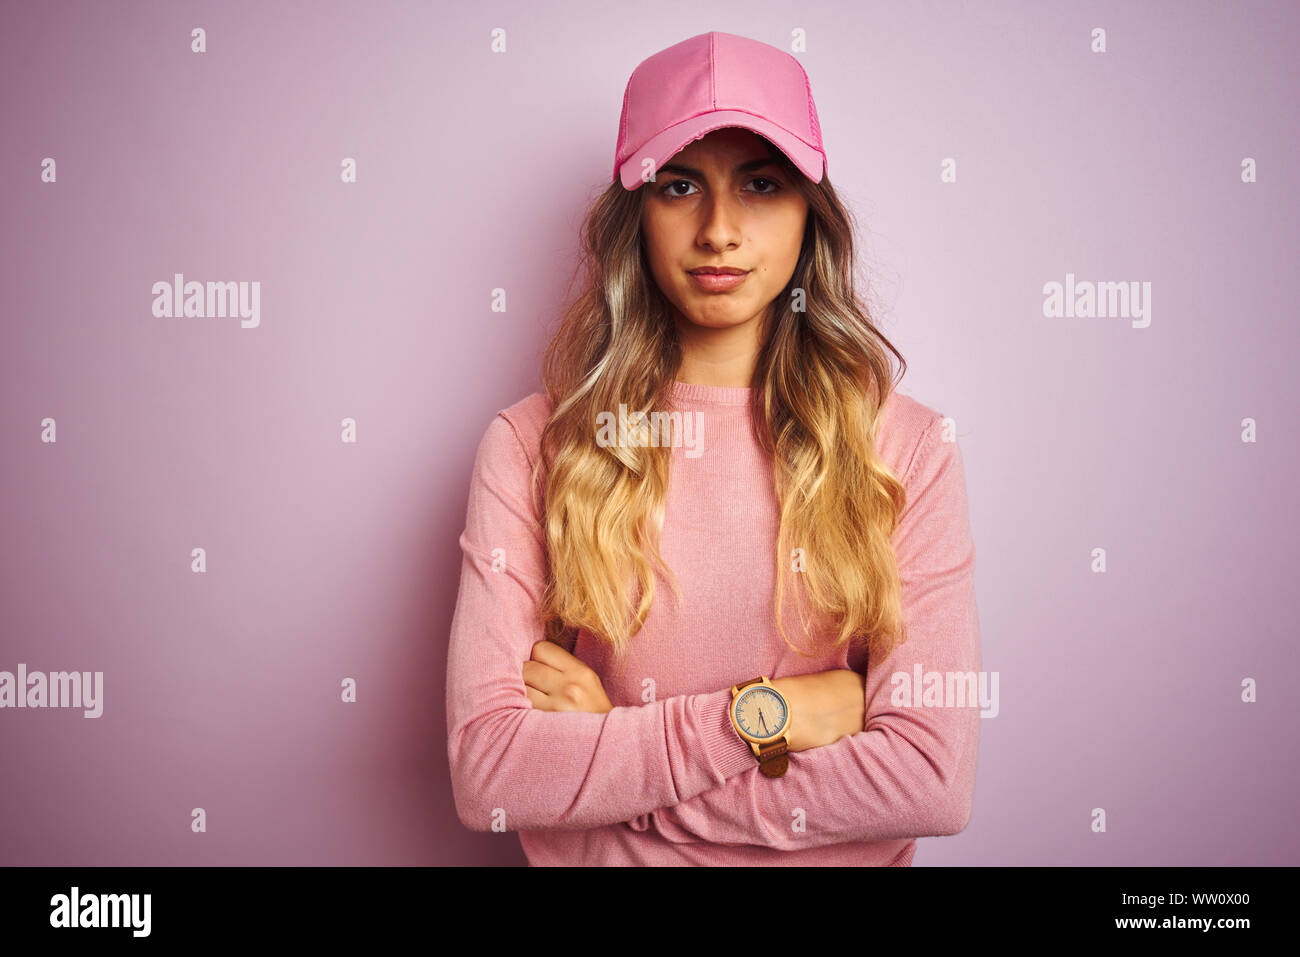 Young beautiful woman wearing cap over pink isolated background skeptic and nervous, disapproving expression on face with crossed arms. Negative perso Stock Photo